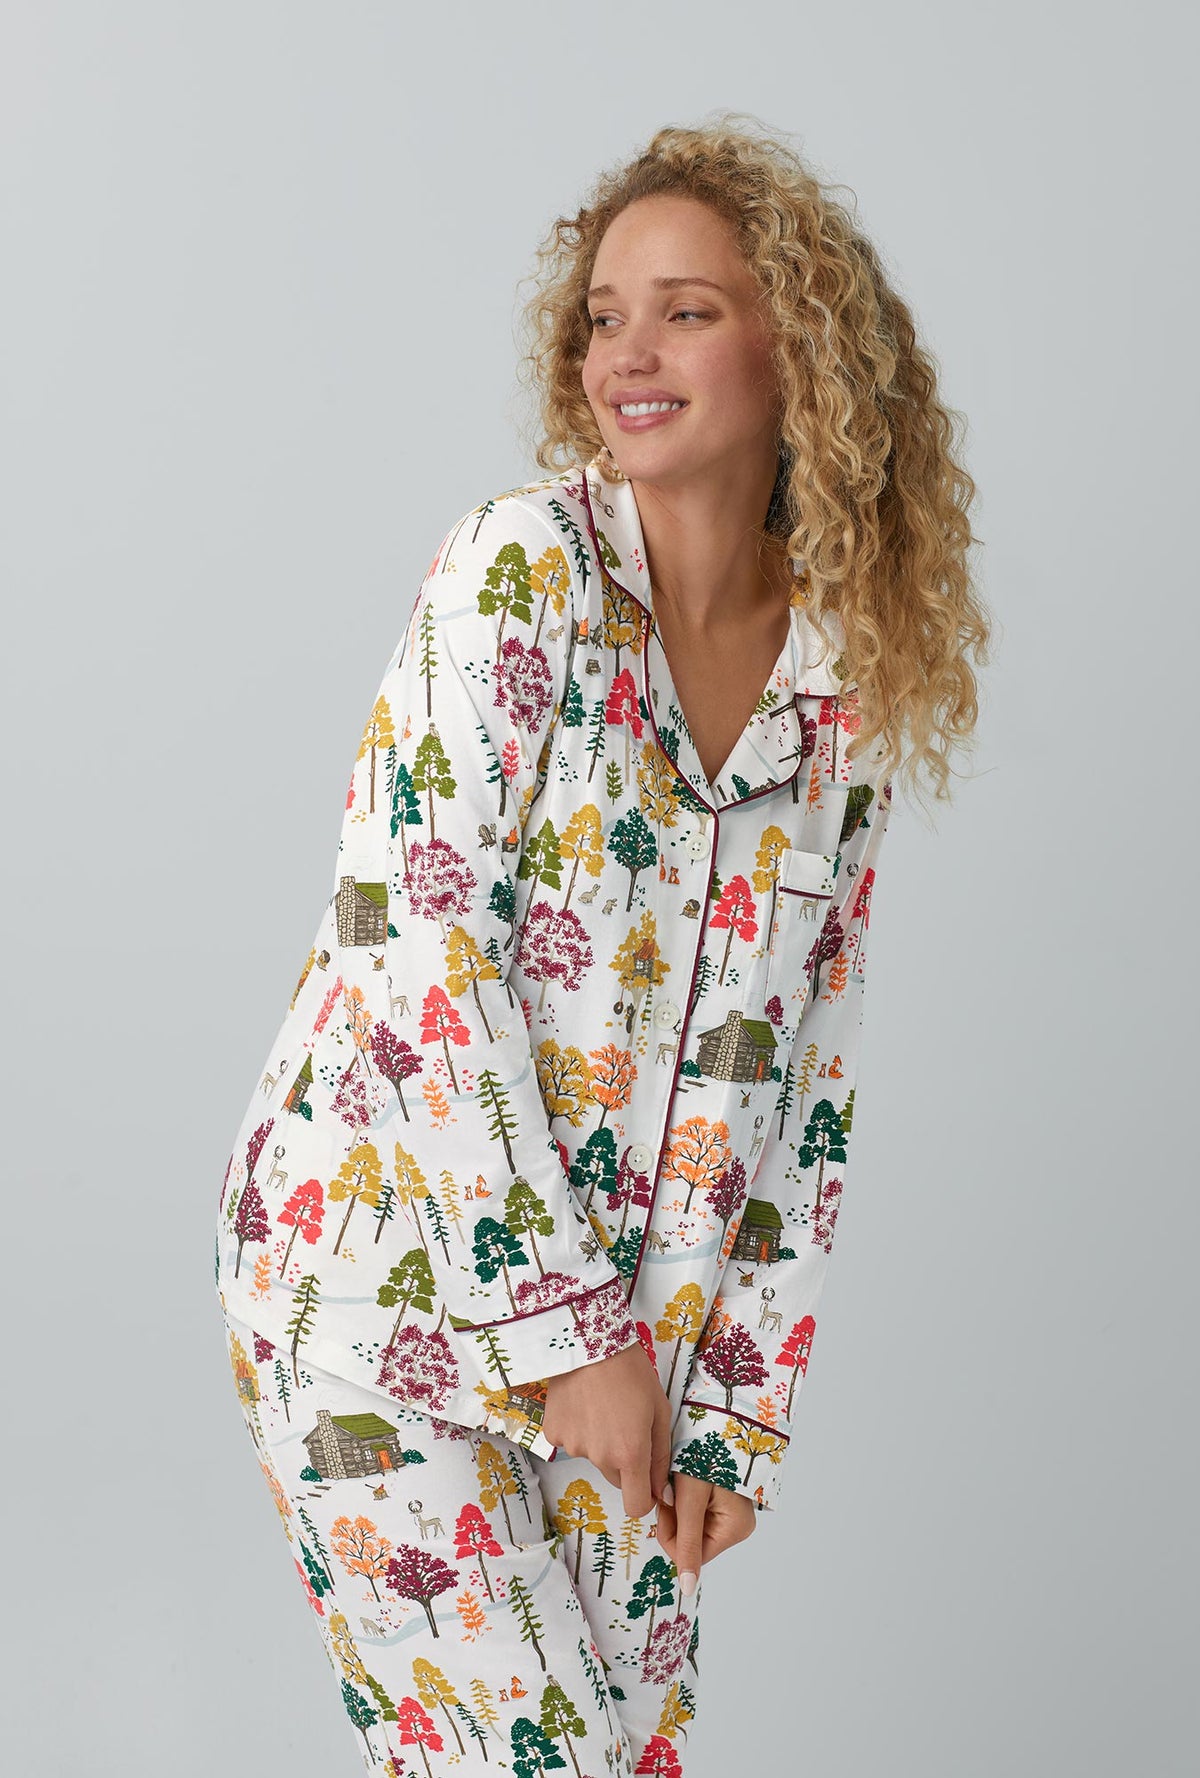 A lady wearing white Long Sleeve Classic Stretch Jersey PJ Set with Forest Retreat print